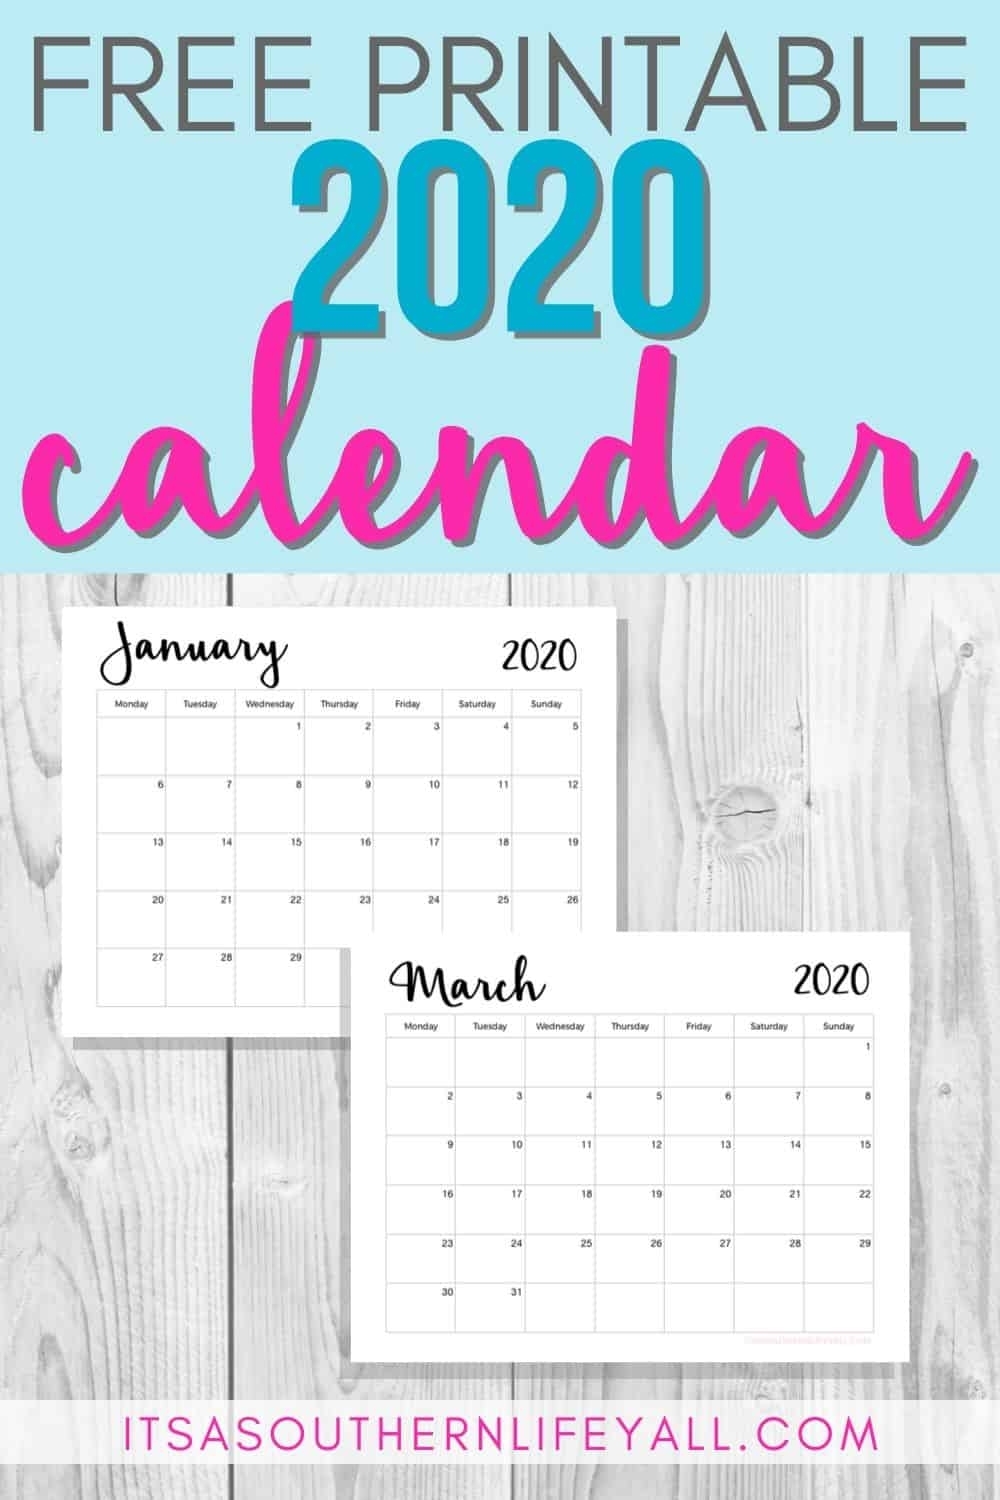 Free Printable 2020 Calendar - It&#039;s A Southern Life Y&#039;all